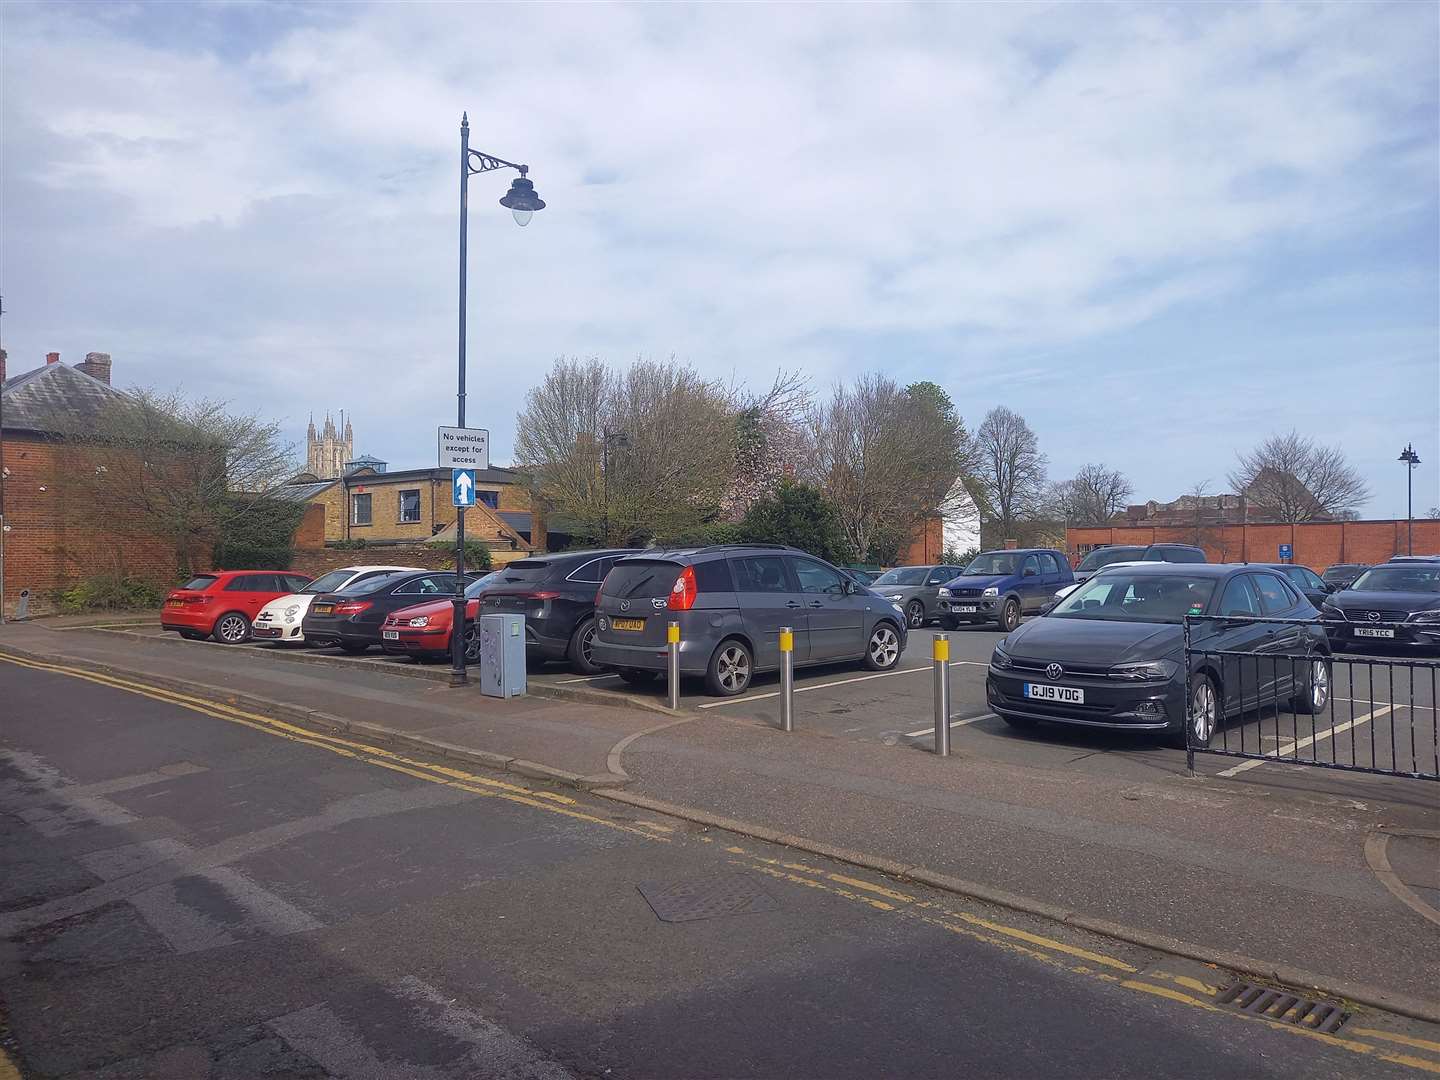 Longport car park is one of the sites set to be considered